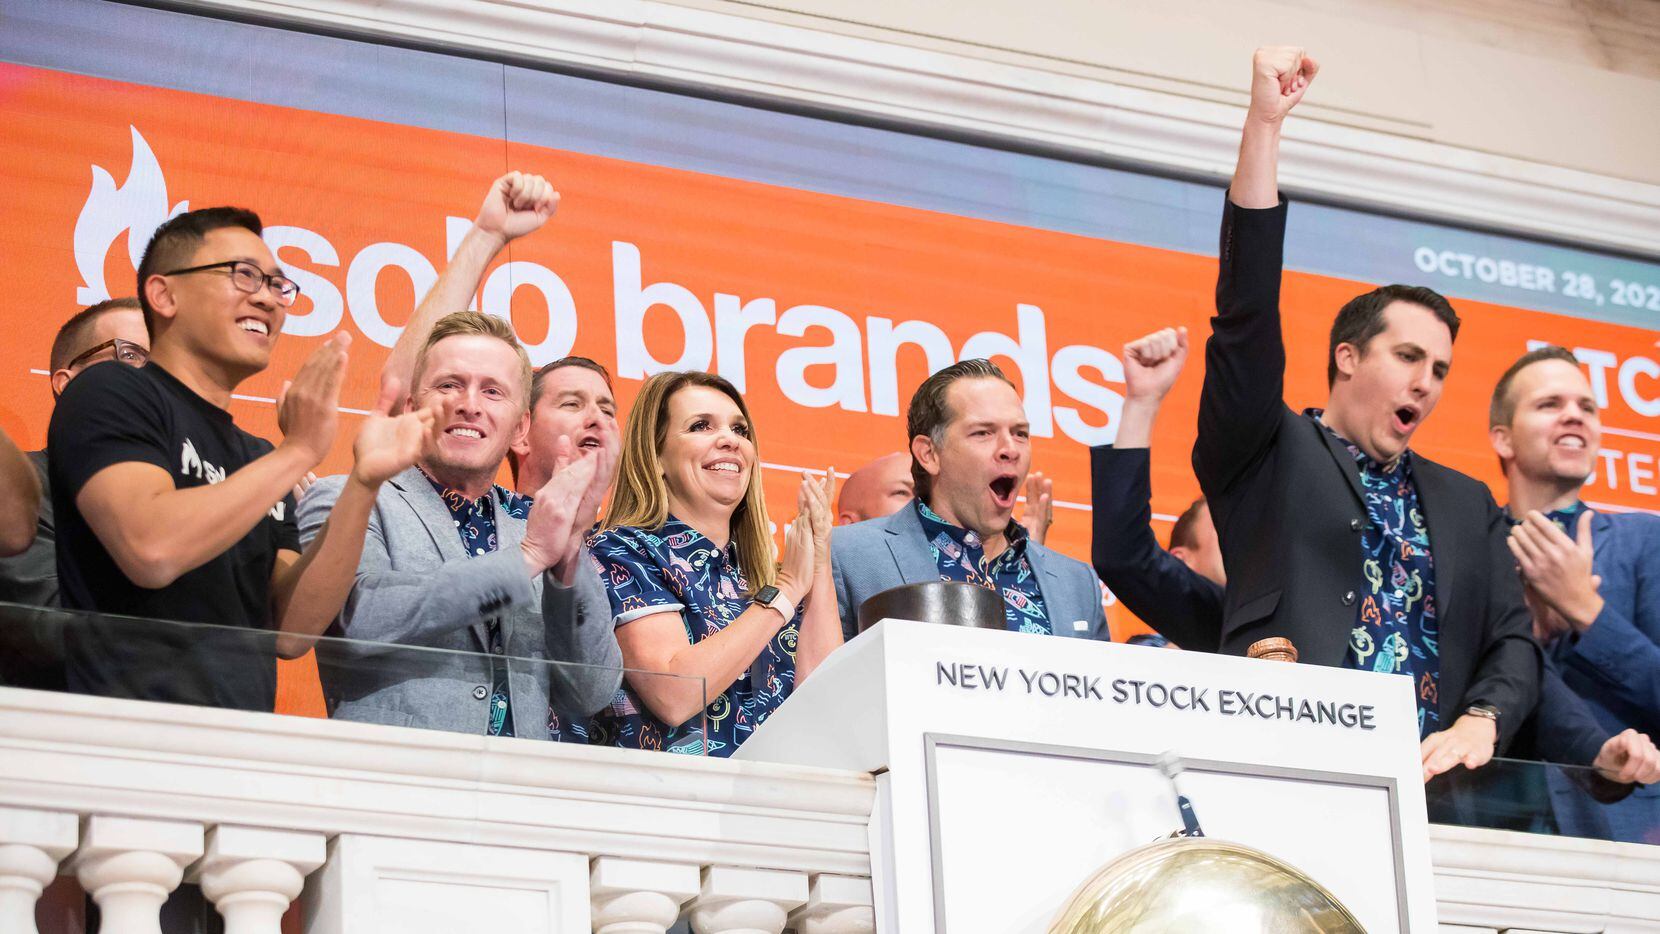 North Texas' Solo Brands rings the NYSE bell to kick off trading on Thursday in celebration...